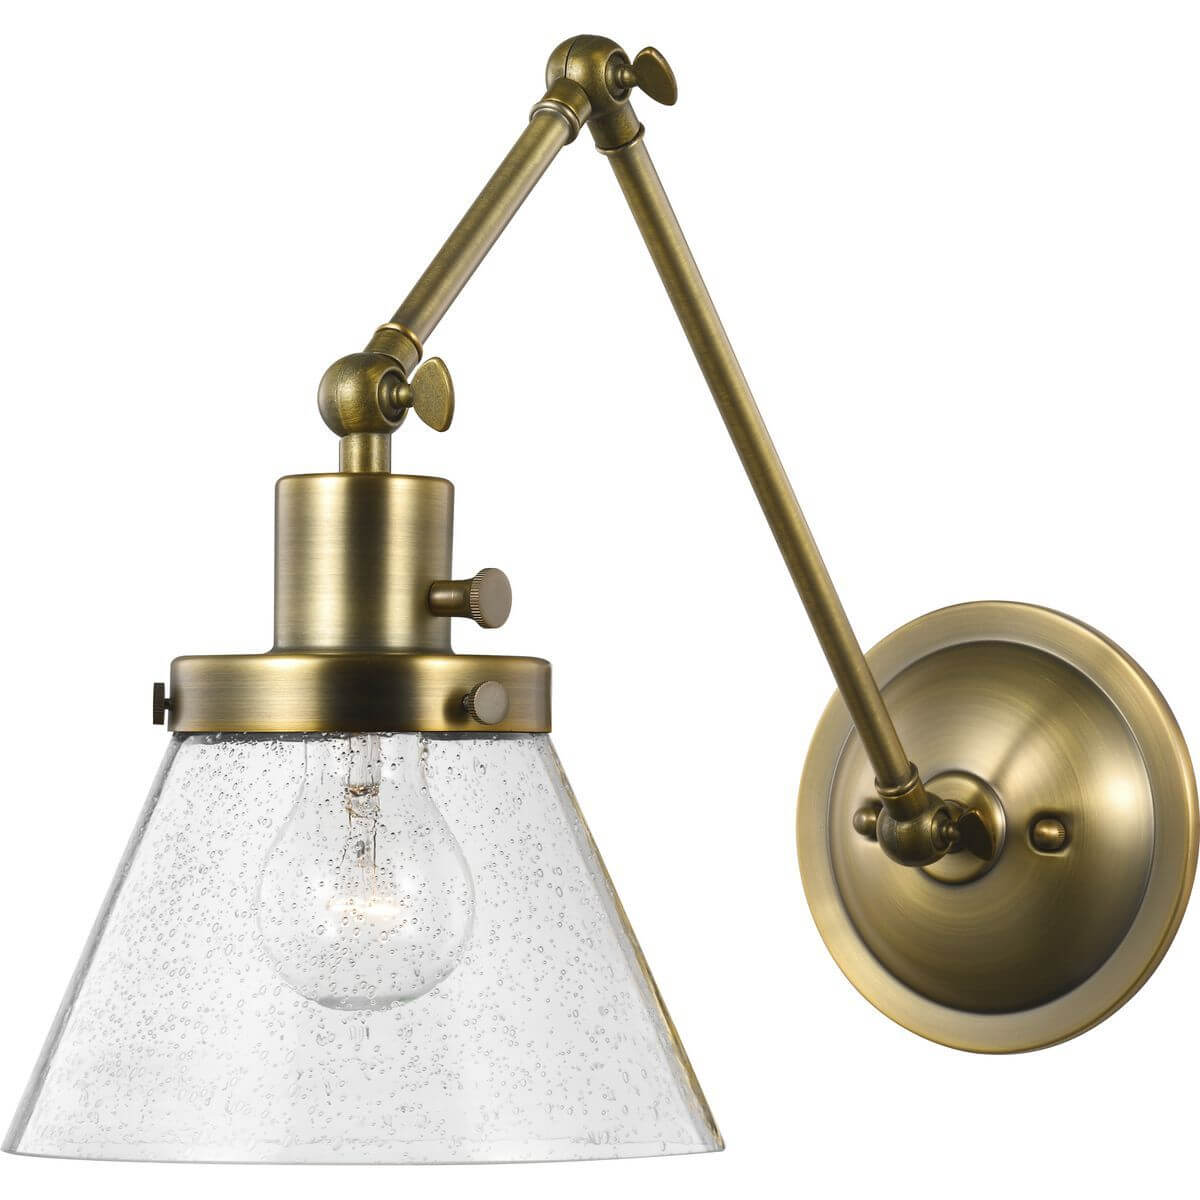 Progress Lighting Hinton 1 Light 14 inch Tall Swing Arm Wall Light in Vintage Brass with Clear Seeded Glass P710094-163